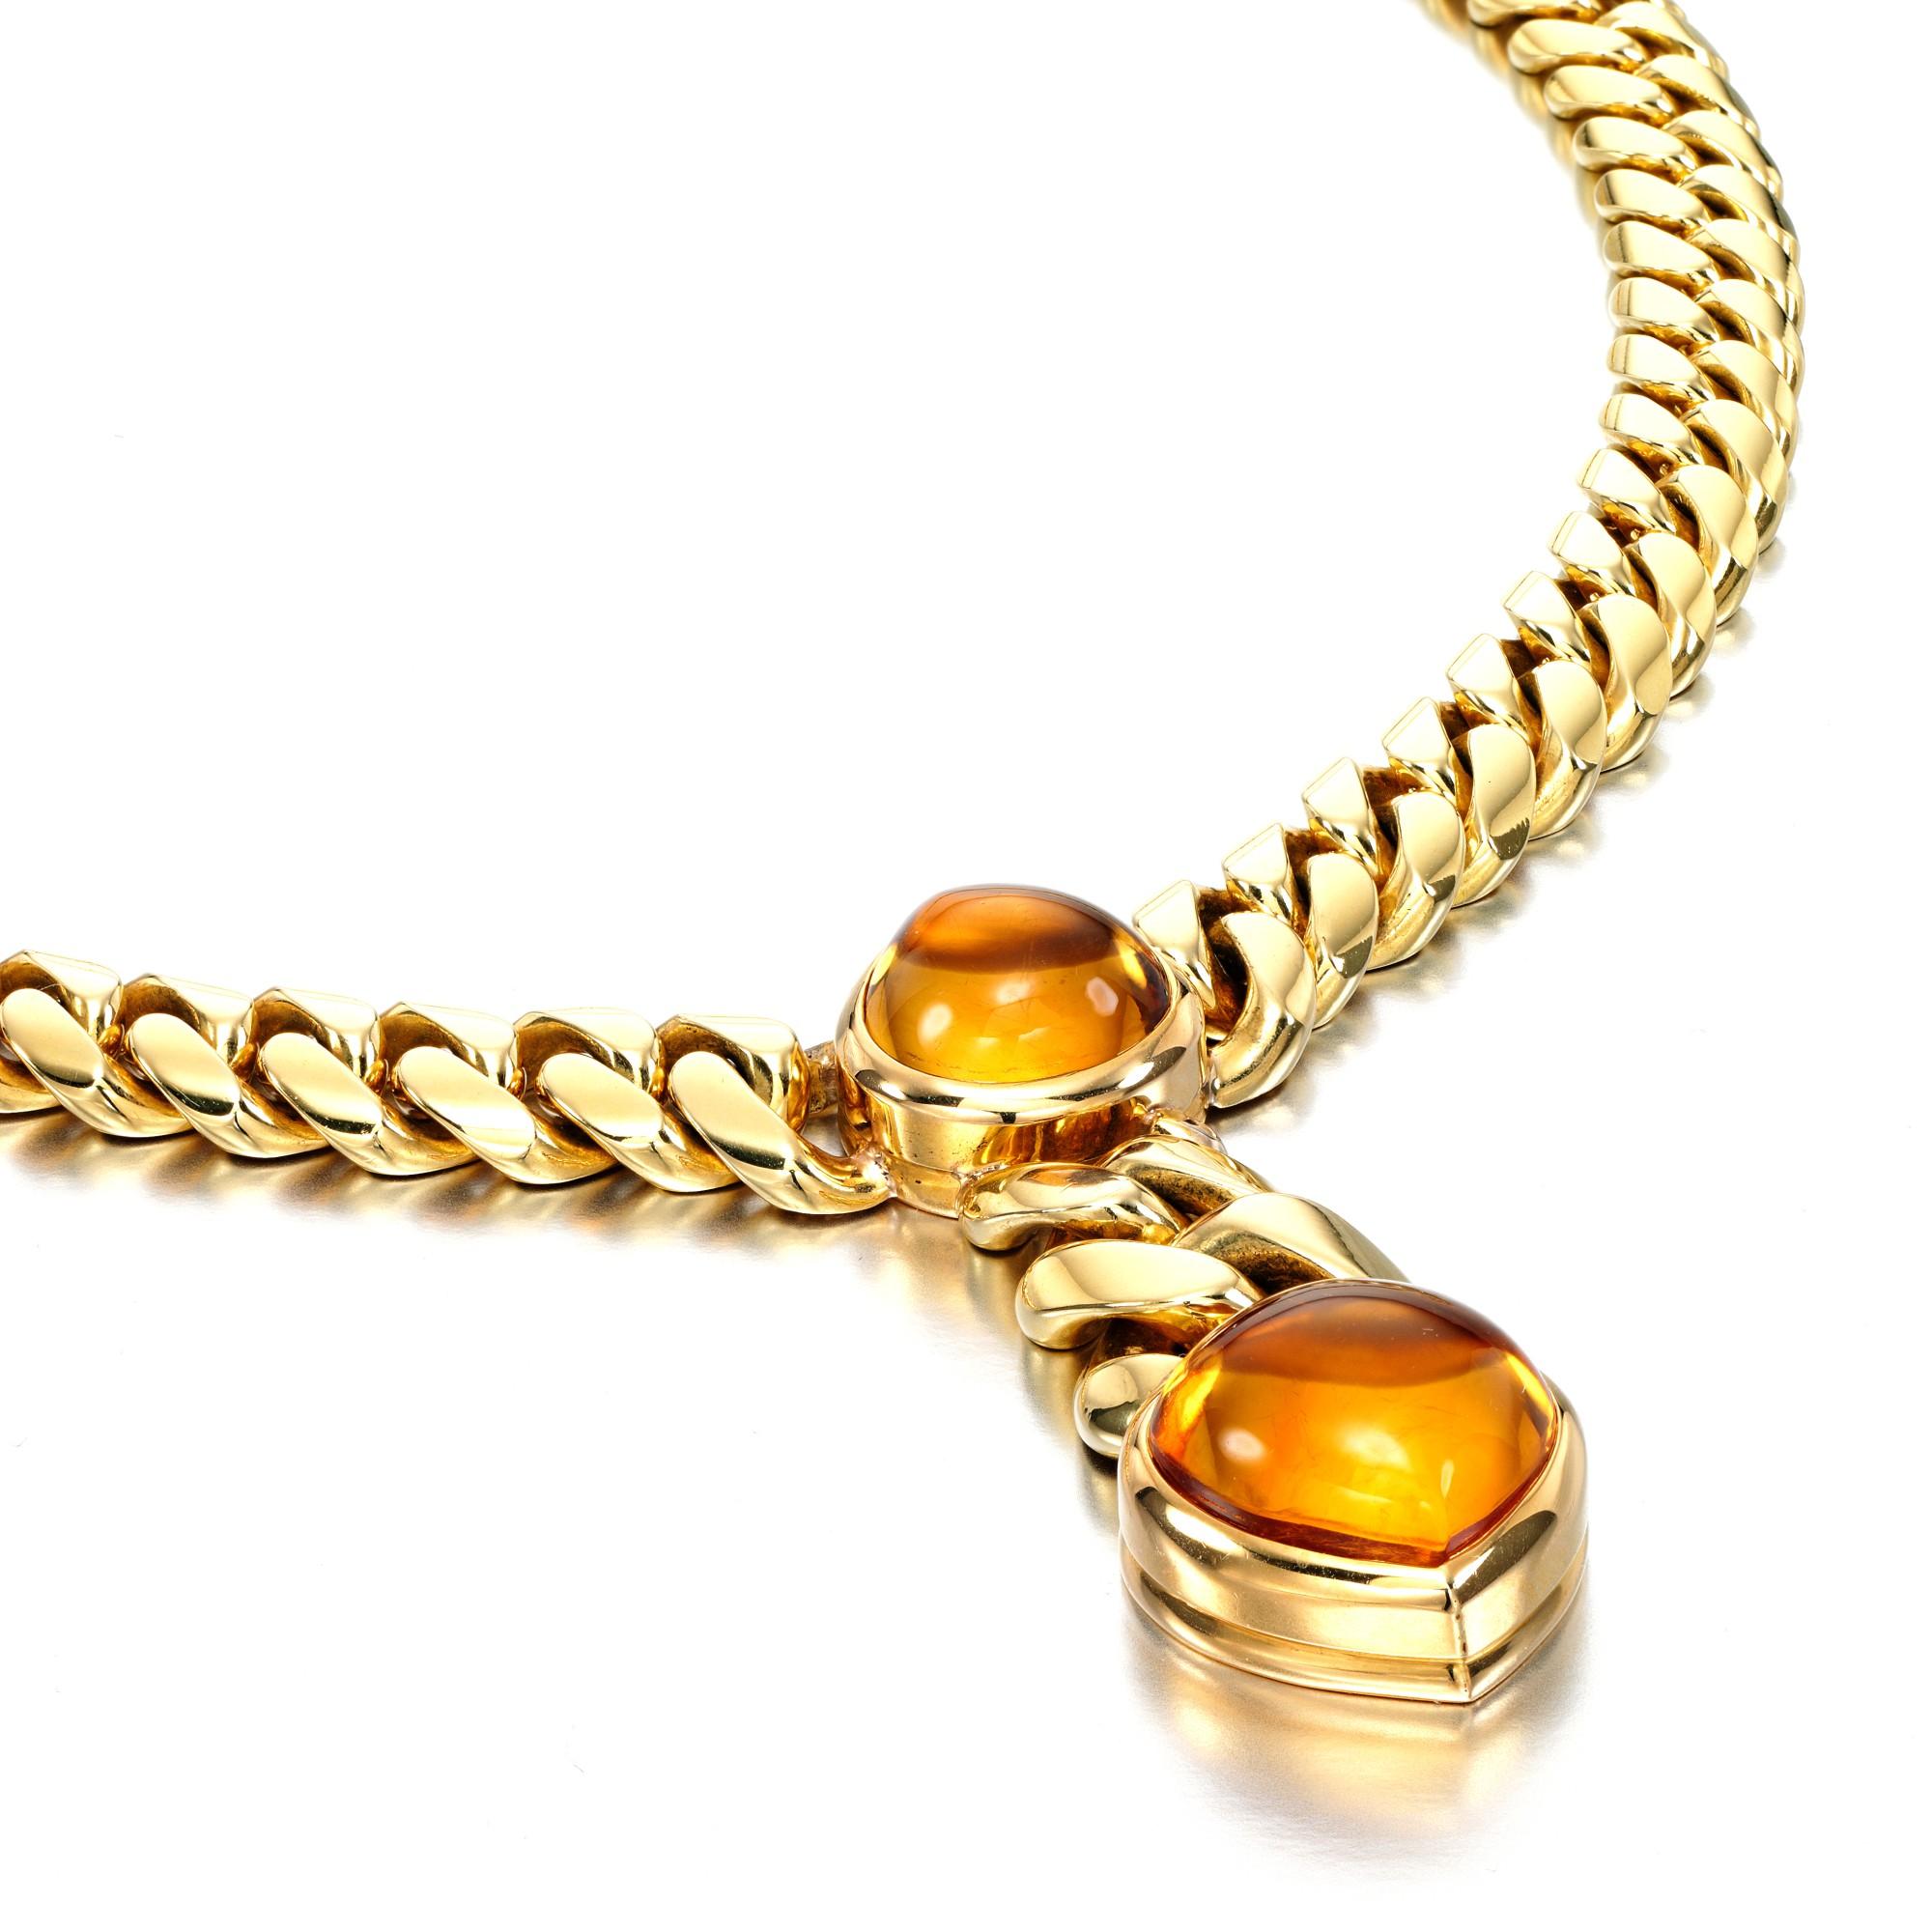 An iconic Bulgari necklace circa 1970s showcasing 2 cabochon citrines suspended by a curb style necklace. The necklace has a total weight of 112 grams.